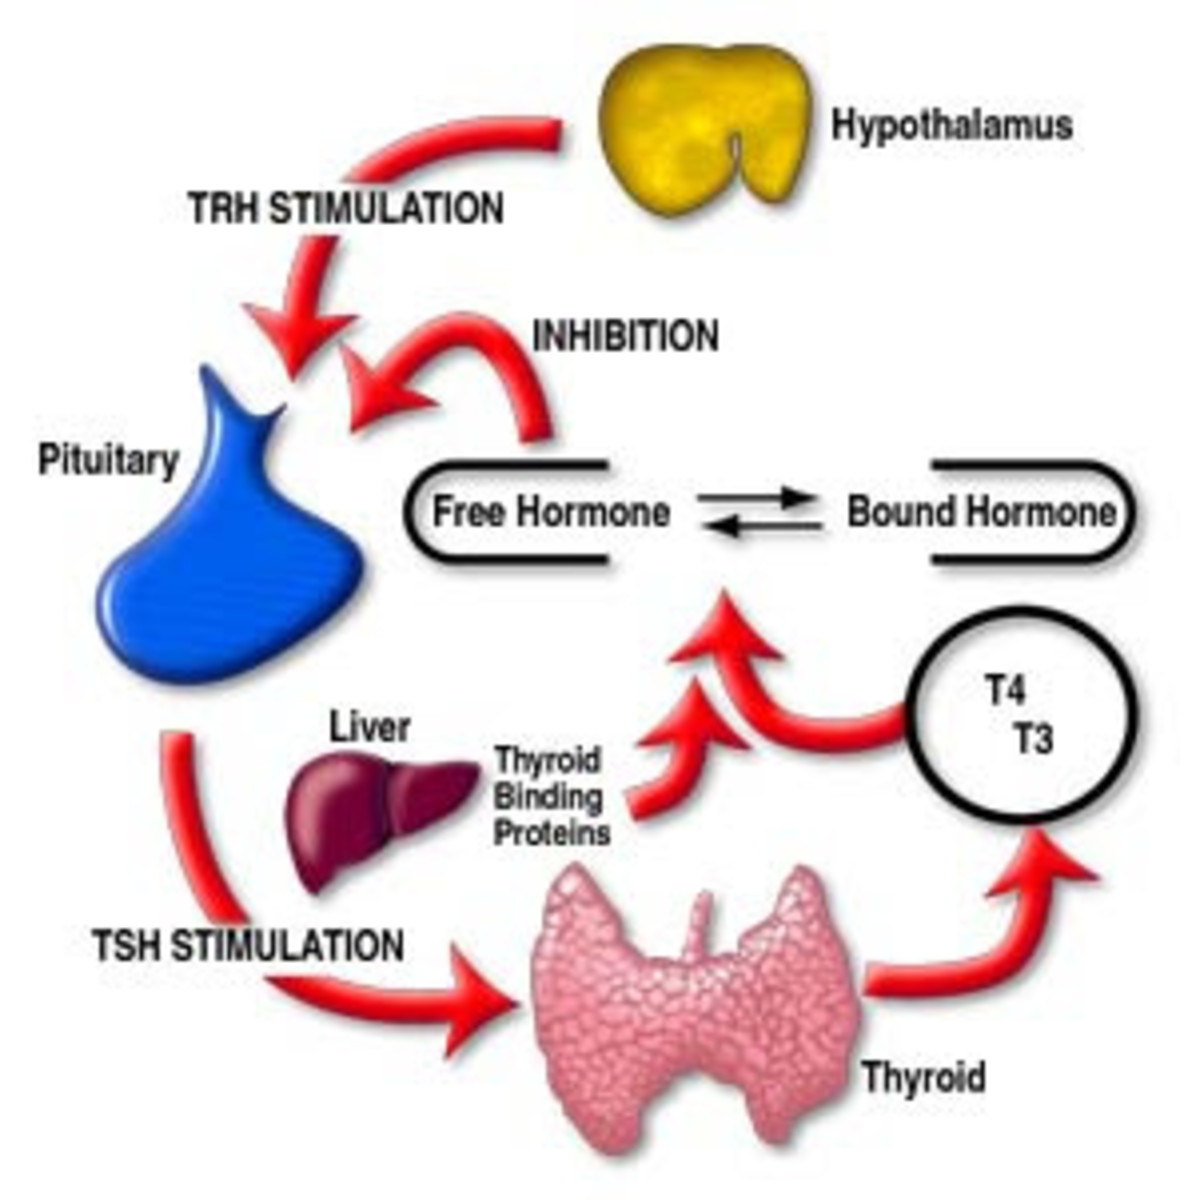 The Pituitary Gland produces a Thyroid Stimulating hormone in response to how much active Thyroxine in running in our blood. This in turn switches the thyroid gland on and off to produce appropriate amounts of Thyroxine. Dietary Iodine is essential. 